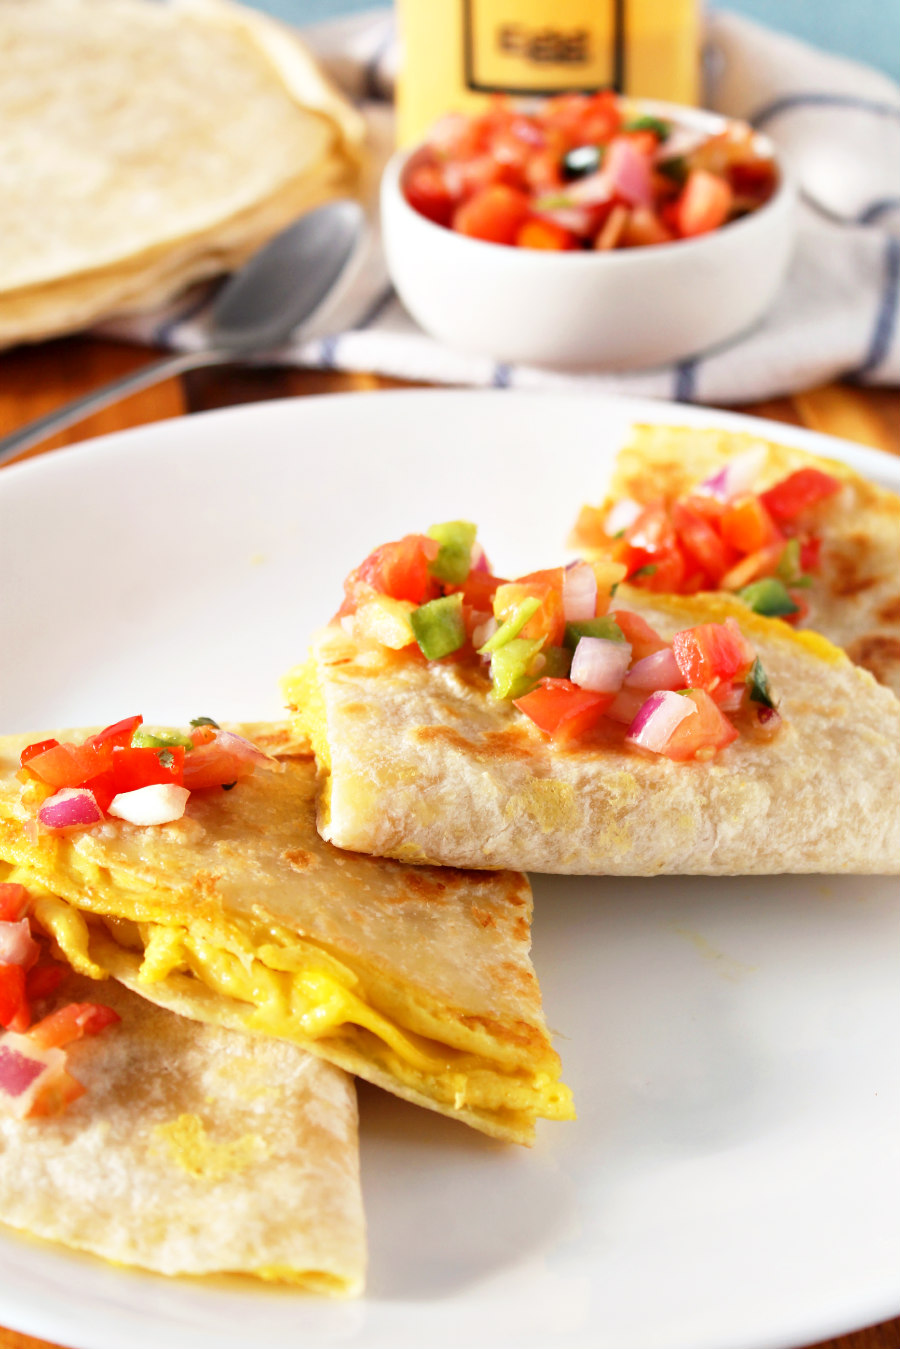 Easy Vegan Breakfast Quesadillas stacked with fresh salsa on top. Bowl of fresh salsa, spoon, Just Egg container, and tortillas in the background.